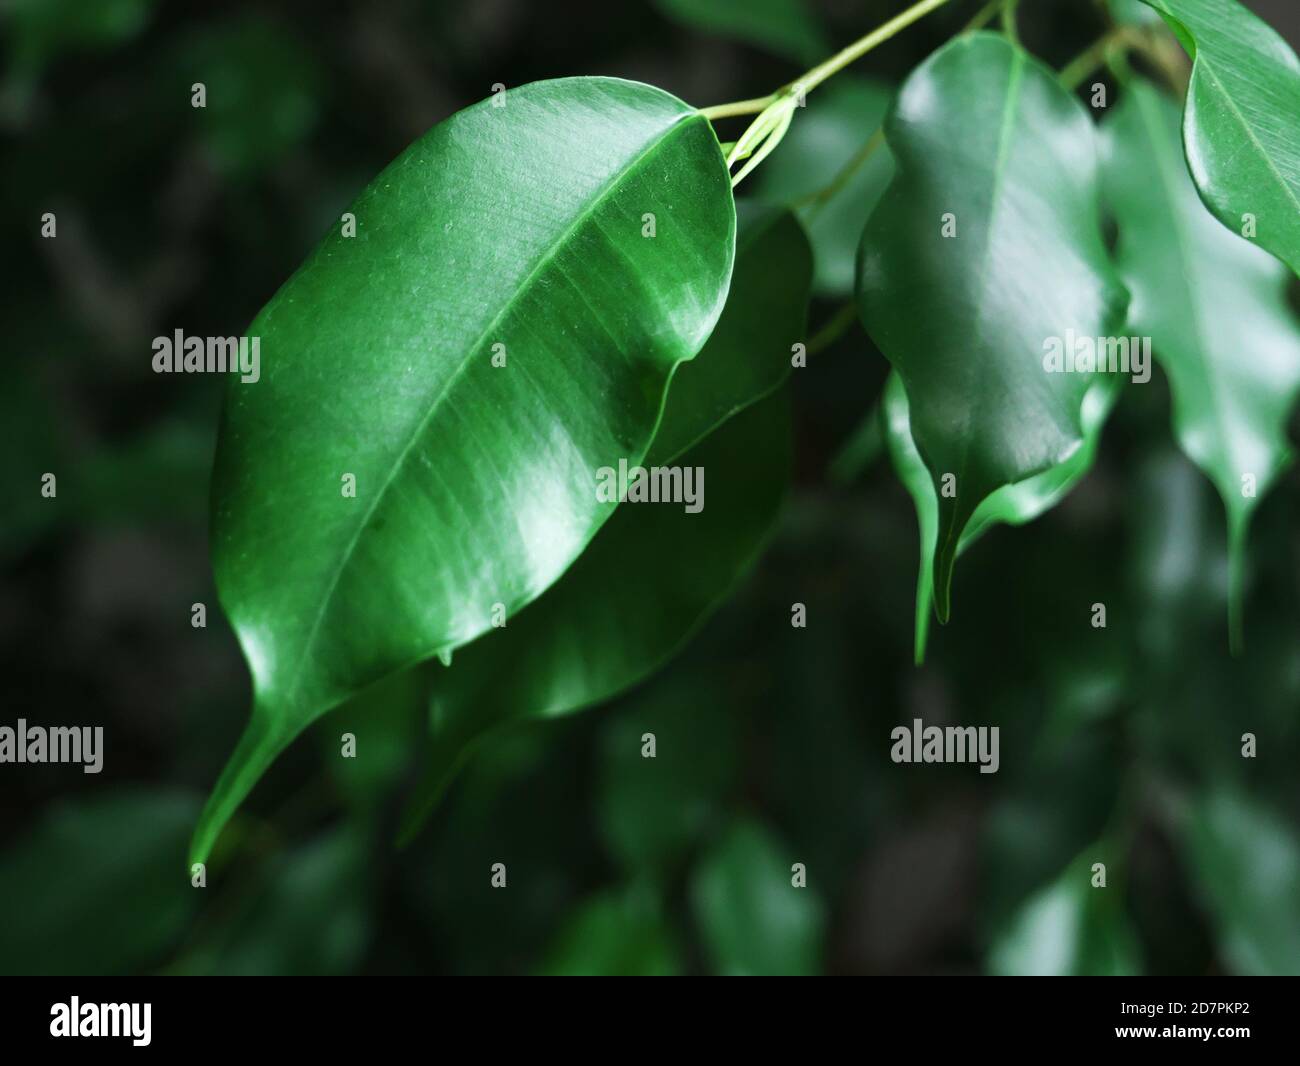 Nature background with a close-up on green ficus leaves Stock Photo